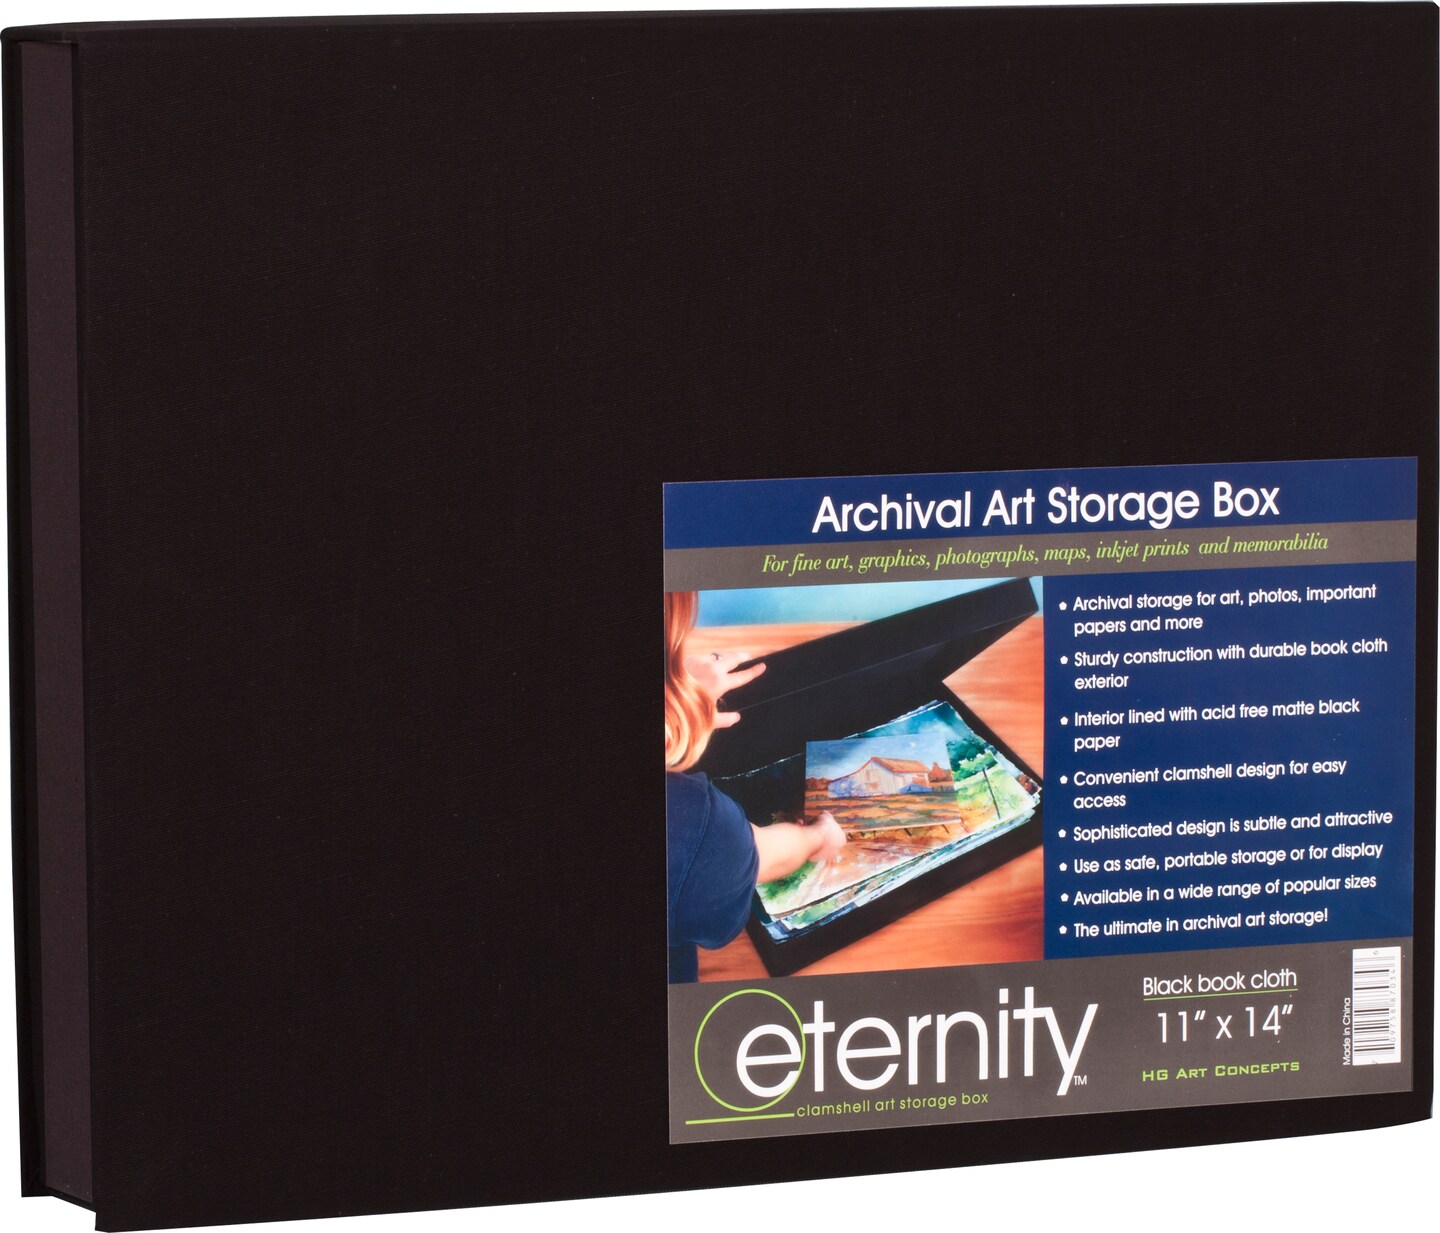 HG Concepts Art Photo Storage Box Eternity Archival Clamshell Box For Storing Artwork, Photos &#x26; Documents Deluxe Acid-Free Sturdy &#x26; Lined With Archival Paper